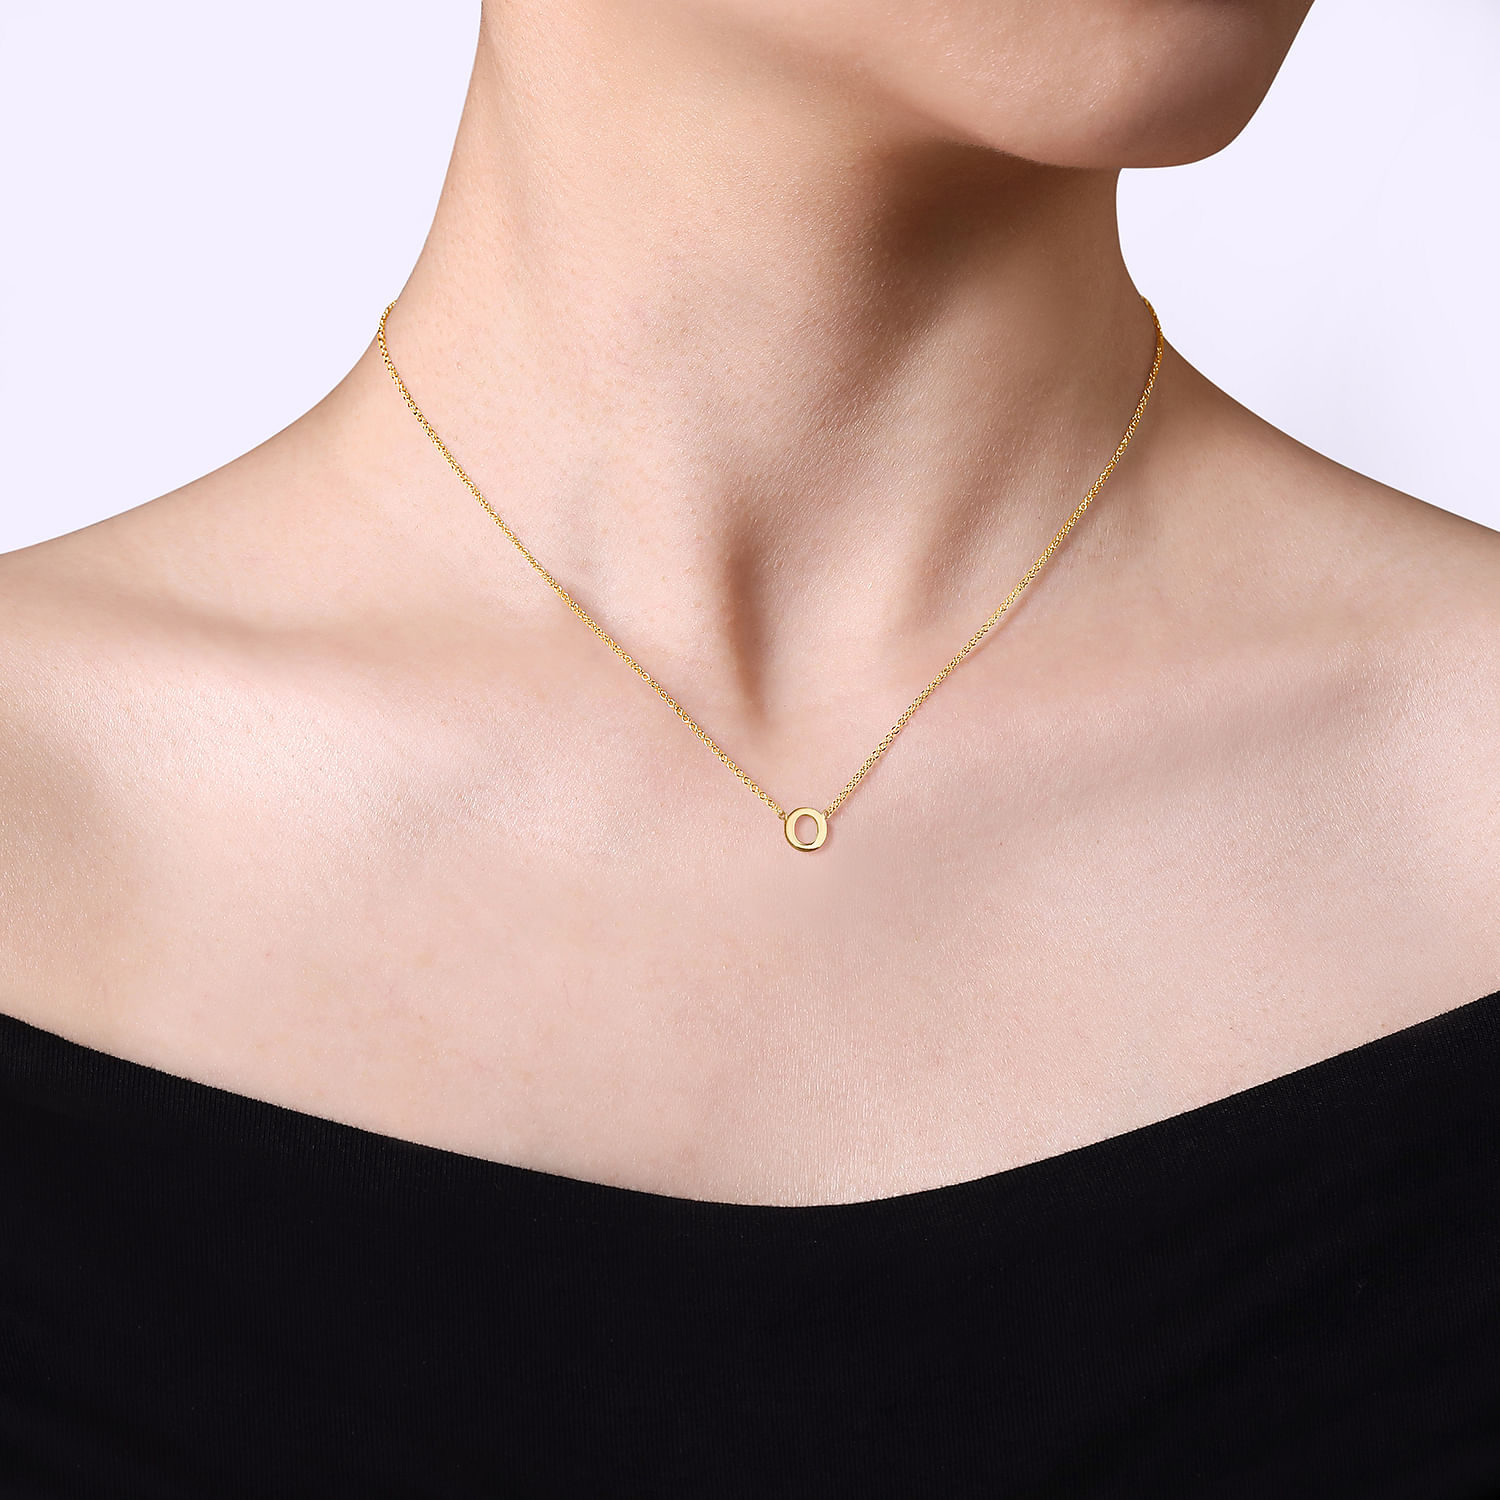 14K Yellow Gold O Initial Necklace